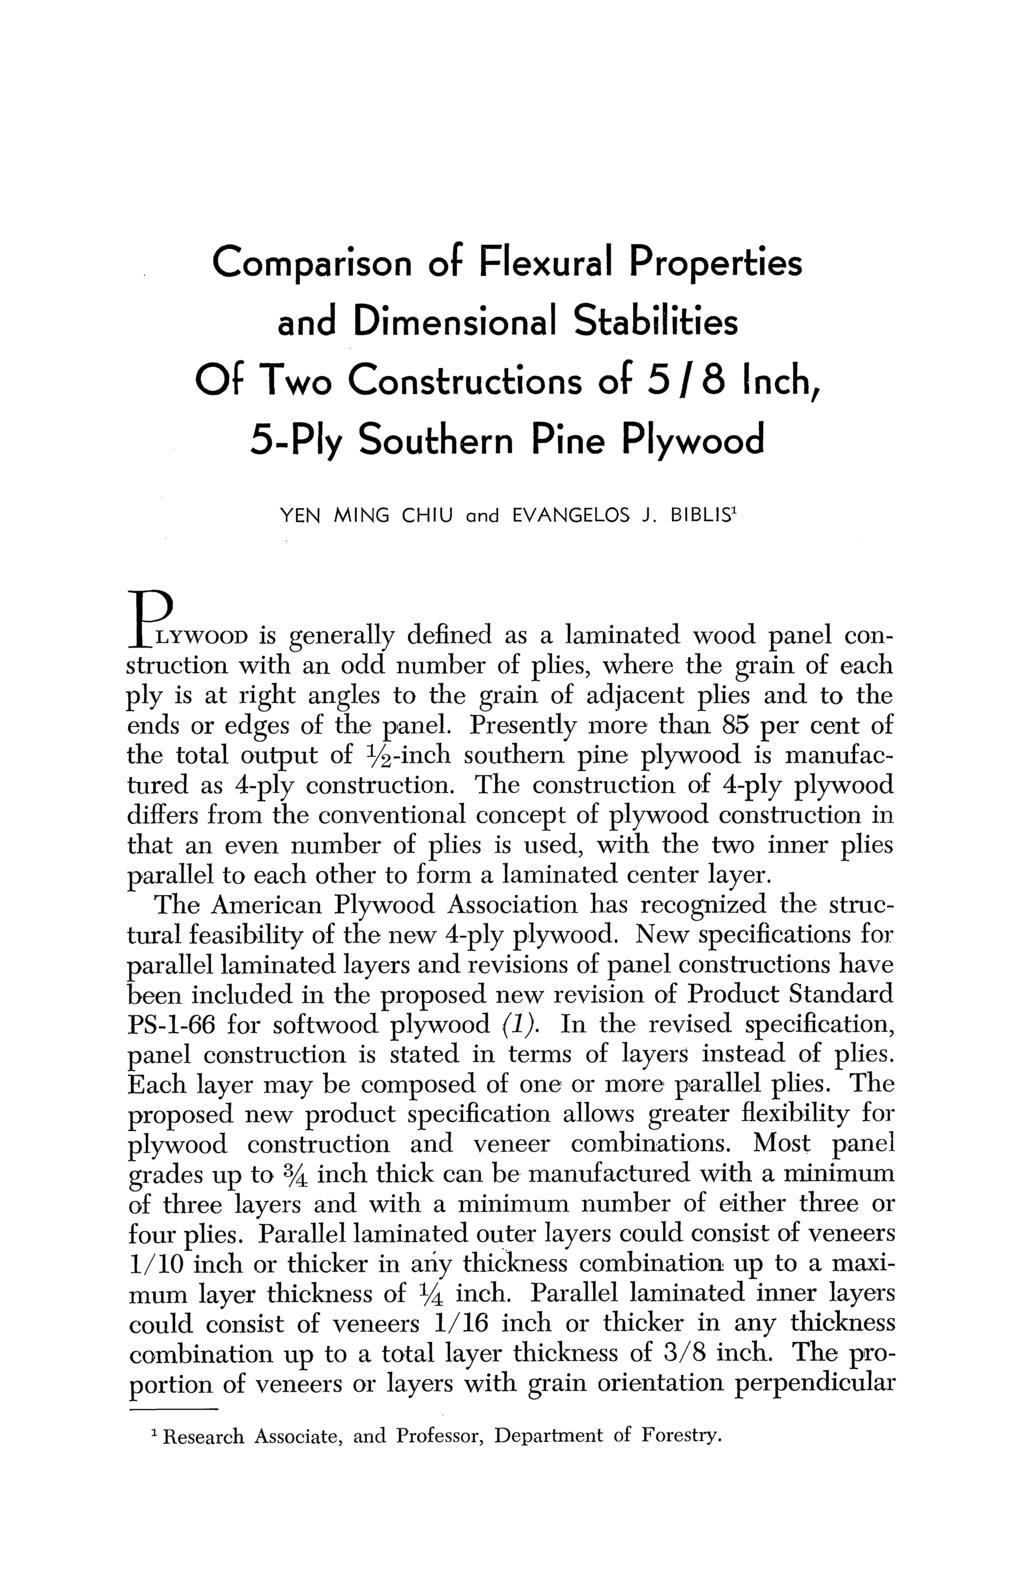 Comparison of Flexural Properties and Dimensional Stabilities Of Two Constructions of 518 Inch, 5-Ply Southern Pine Plywood YEN MING CHIU and EVANGELOS J.